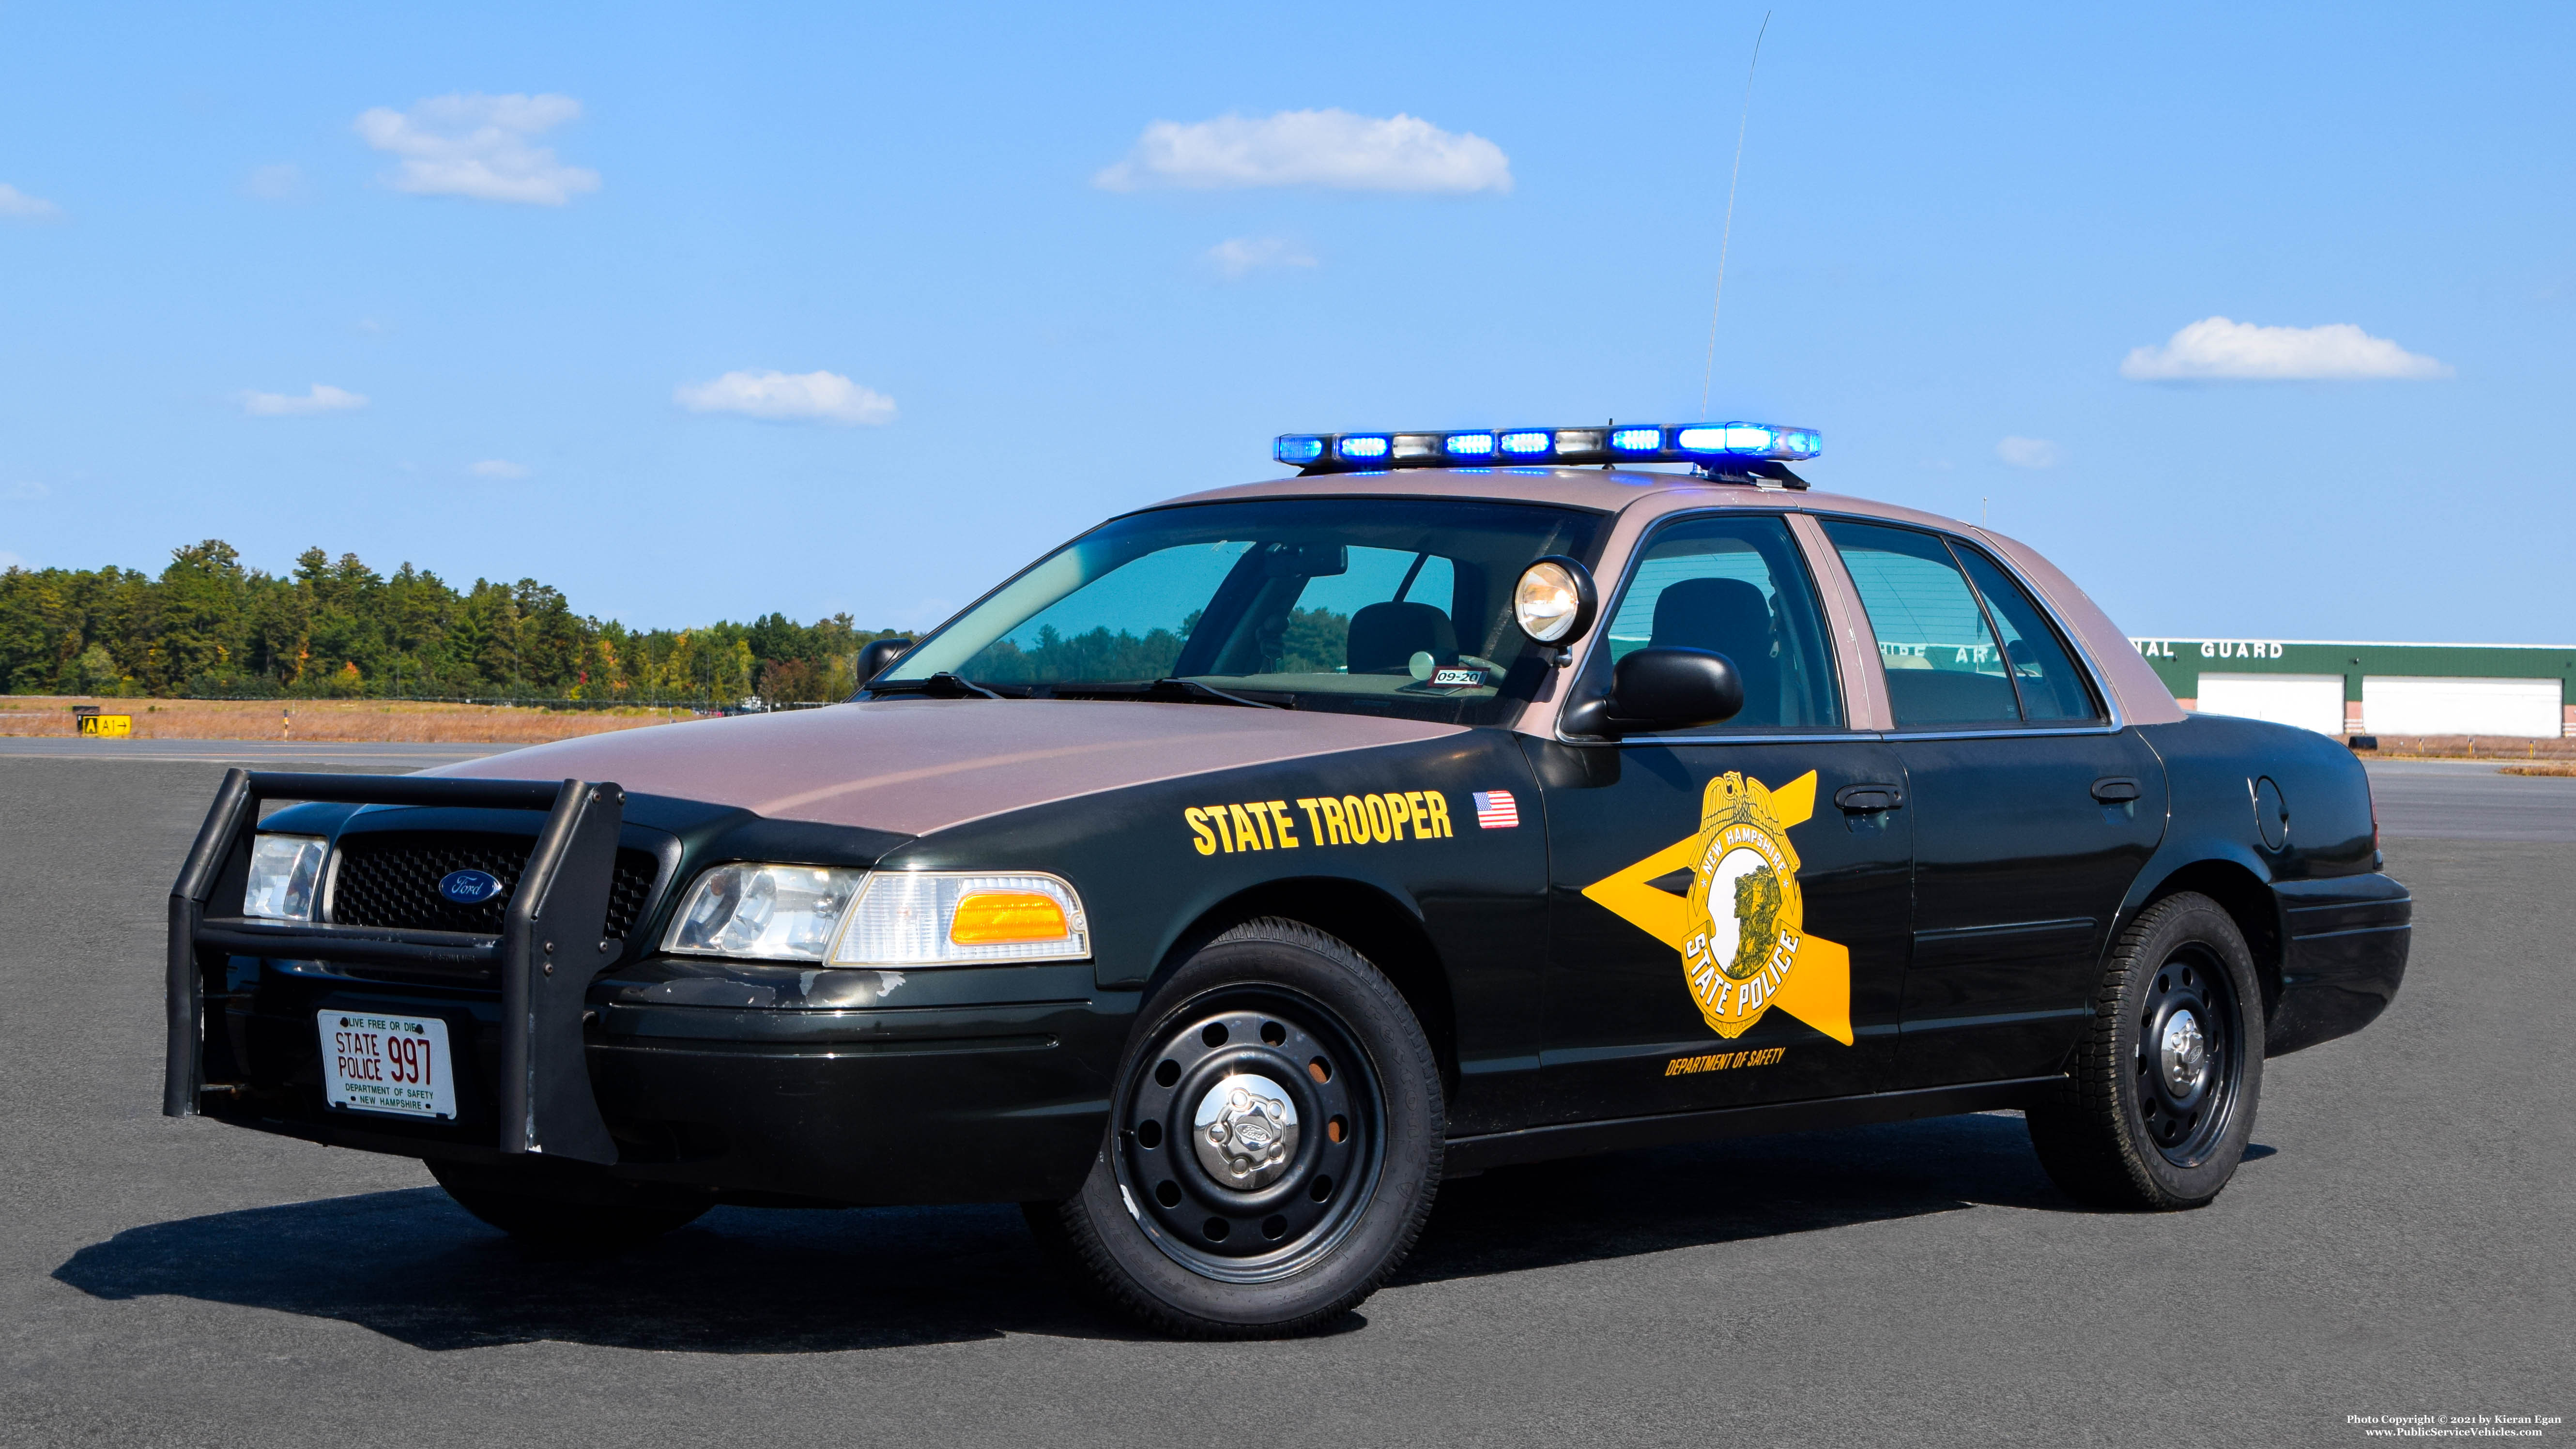 A photo  of New Hampshire State Police
            Cruiser 997, a 2007 Ford Crown Victoria             taken by Kieran Egan